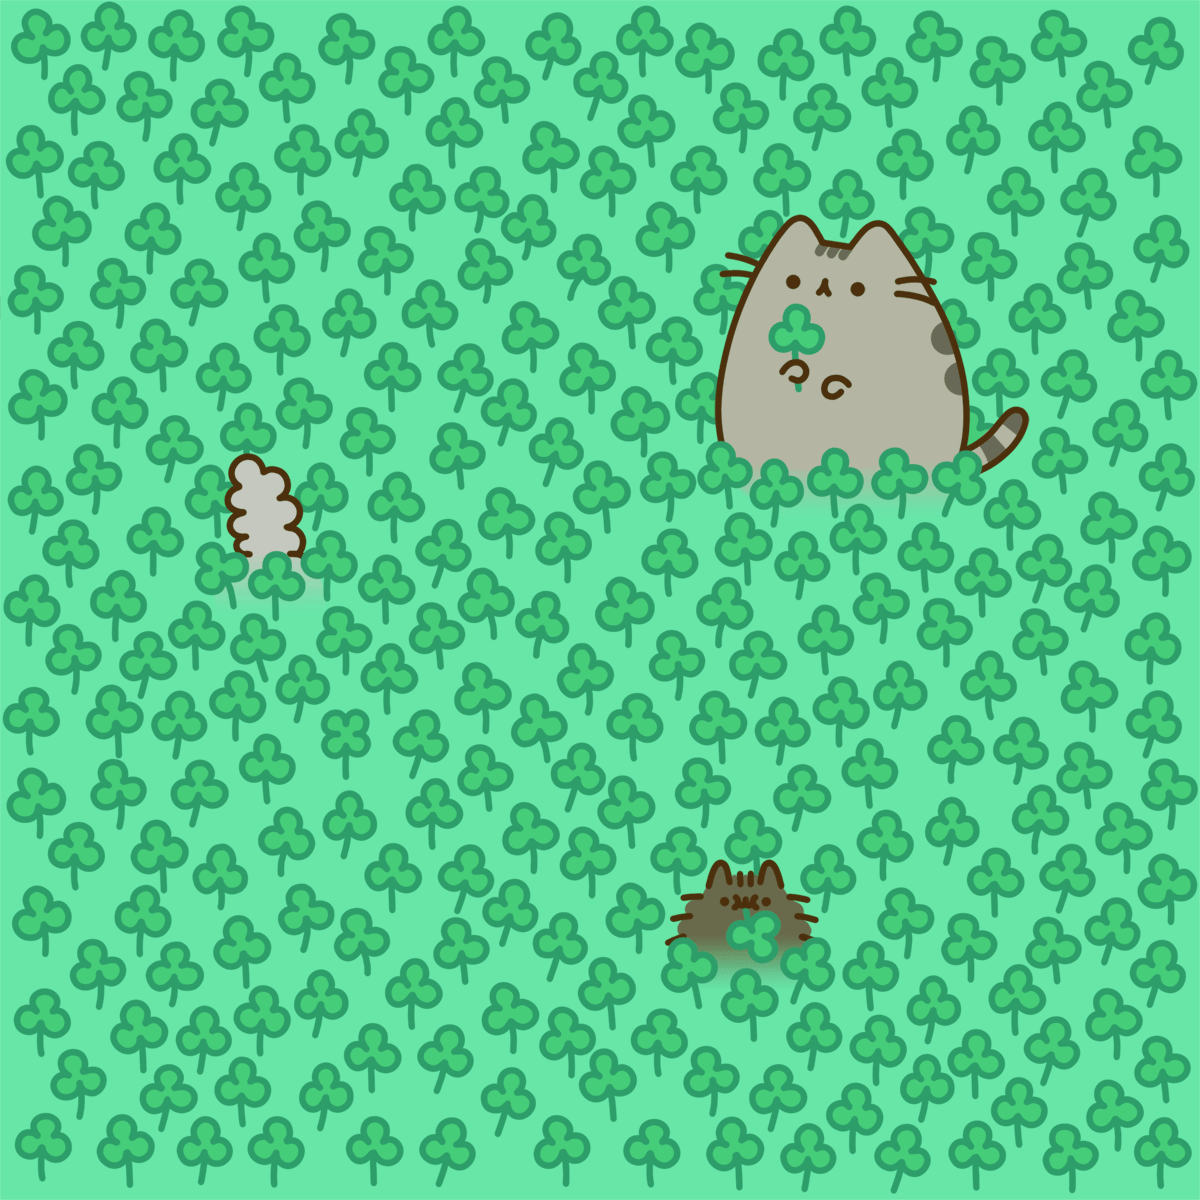 Can you spot the four-leaf clover?  (by Pusheen